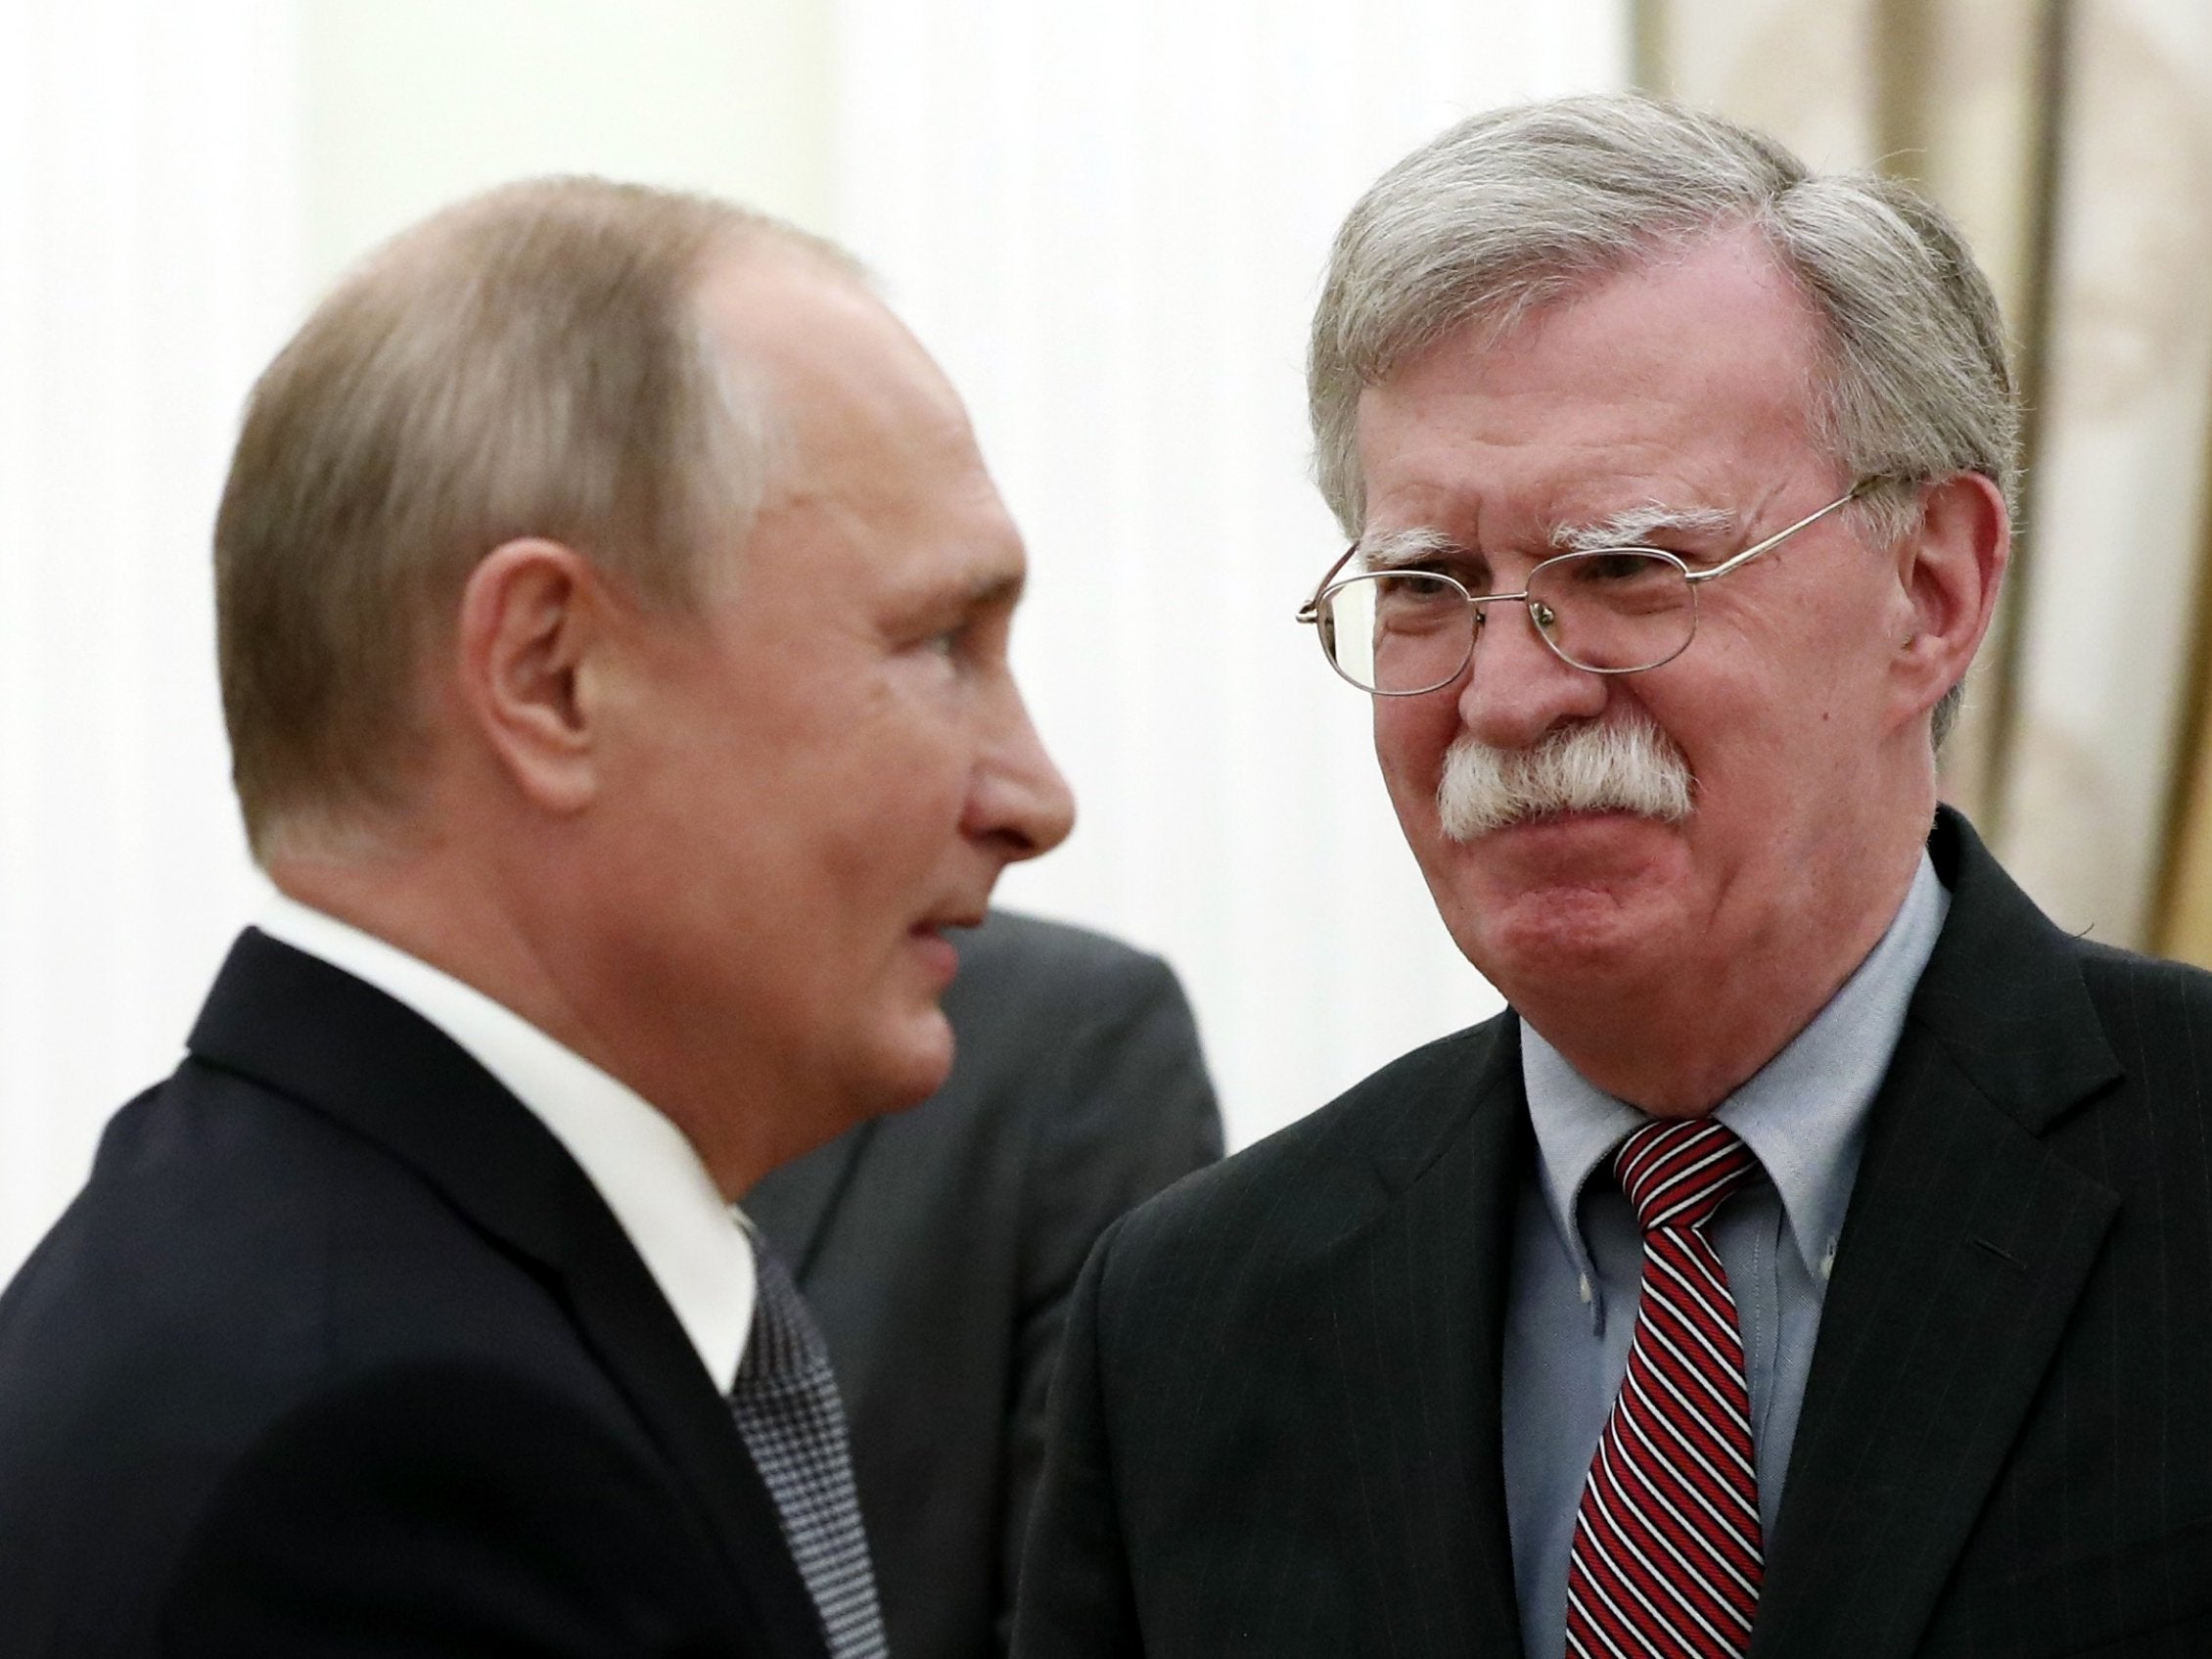 John Bolton, right, made the announcement after meeting President Putin at the Kremlin on Tuesday